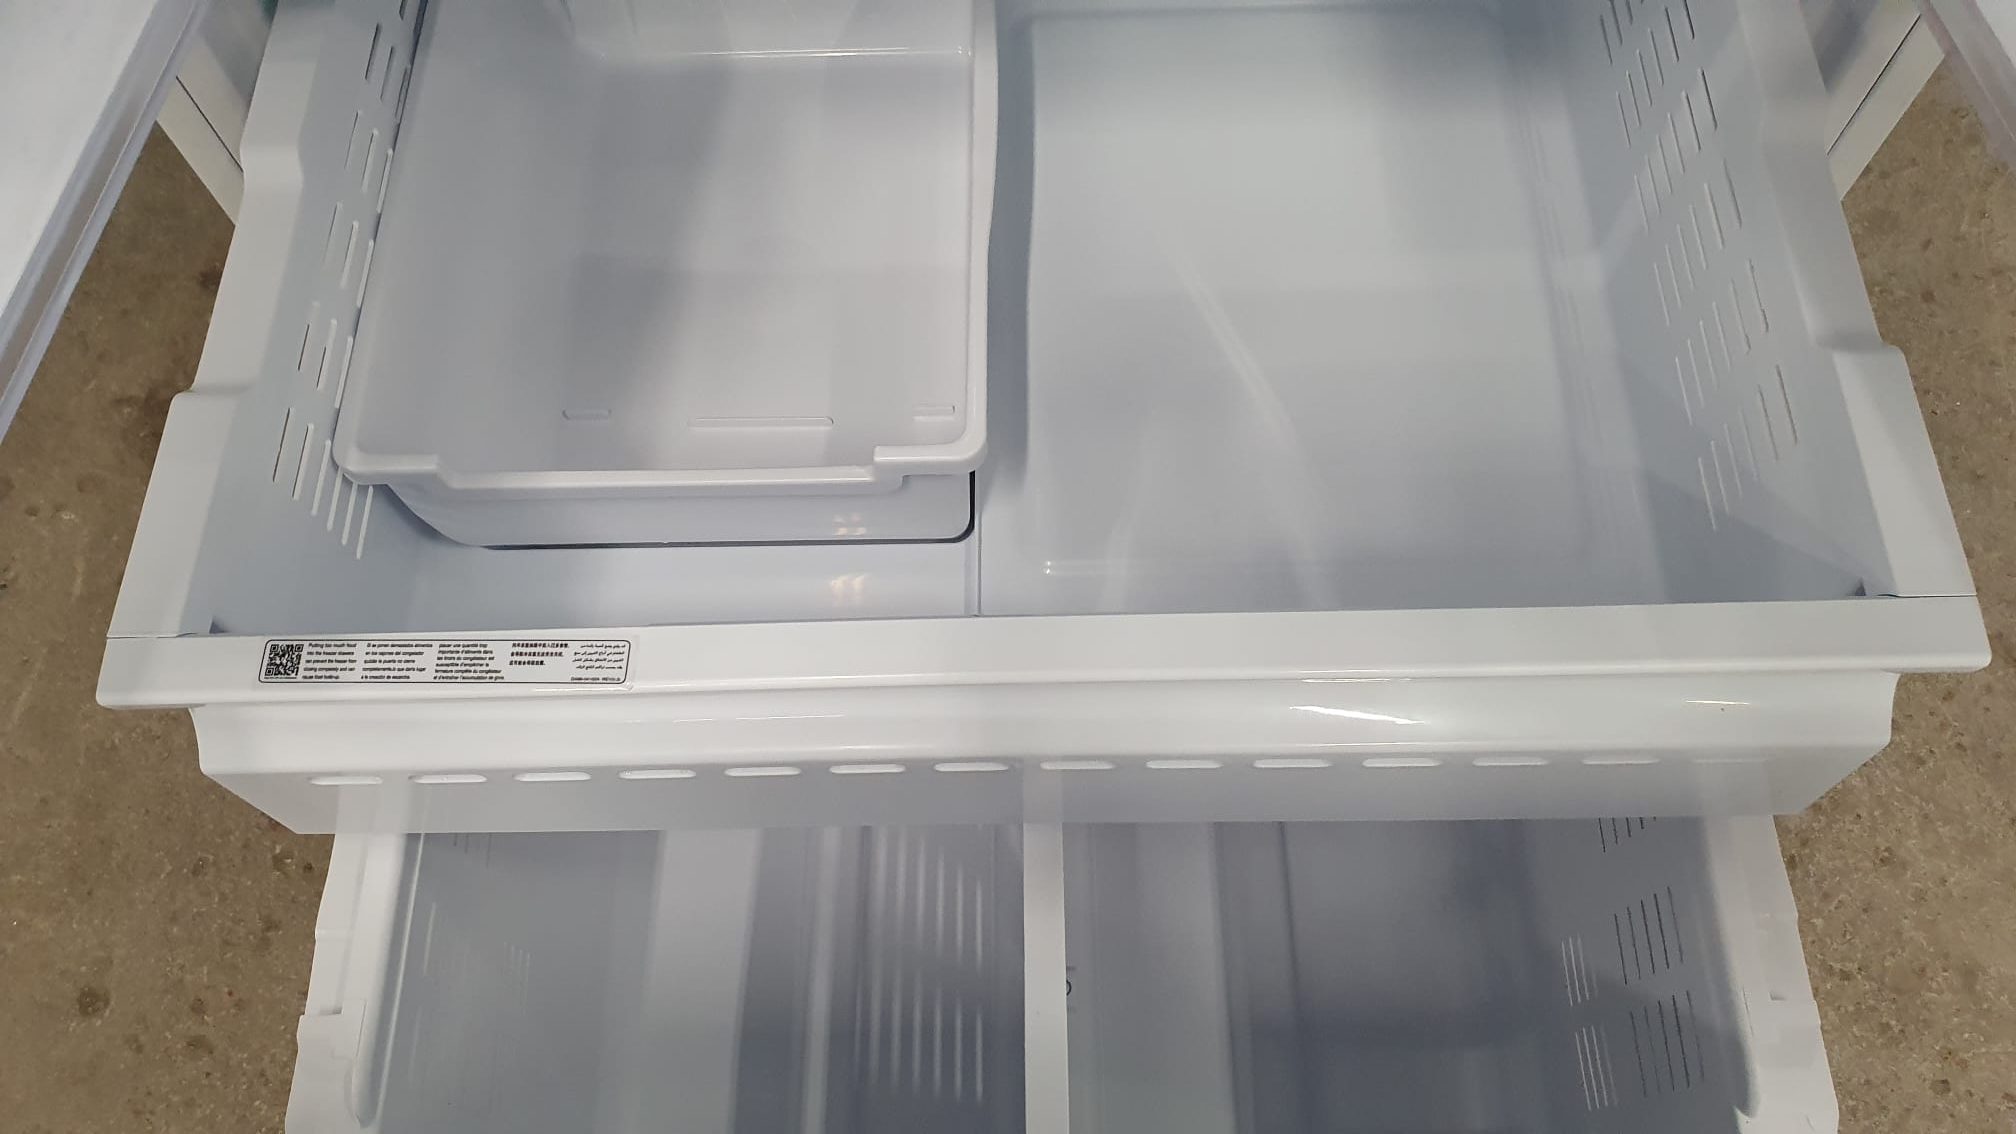 Order Your Used Less Than 1 Year Samsung Refrigerator RF220NCTAWW Today!